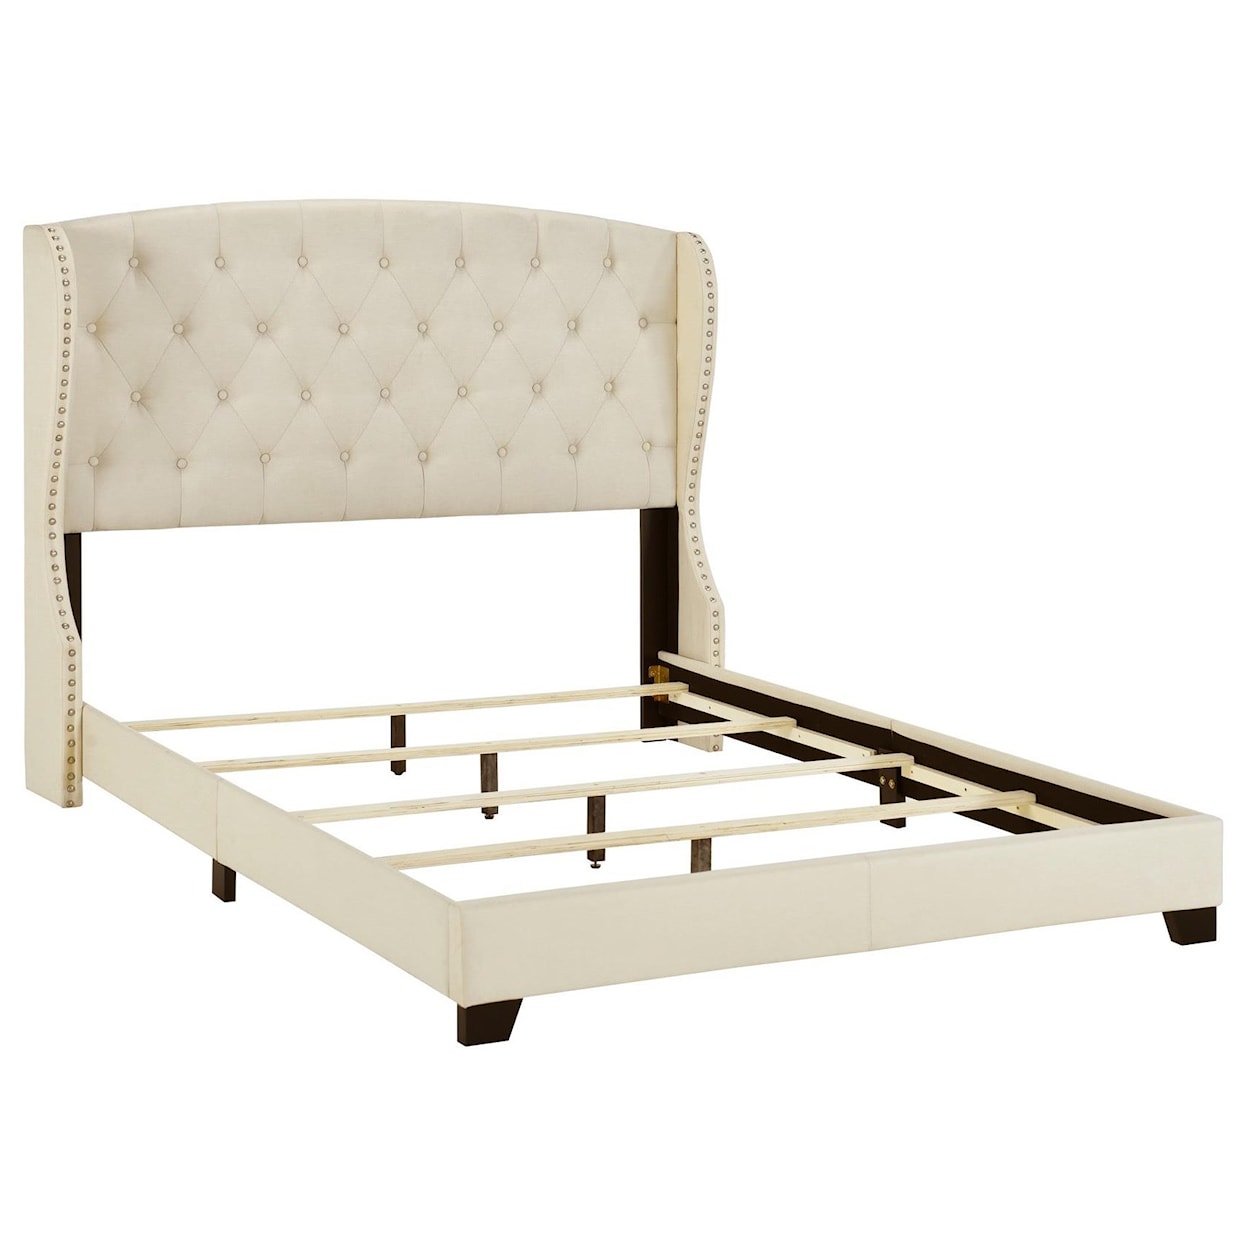 The Monday Company Upholstered Bedroom Queen Tufted Wing Bed